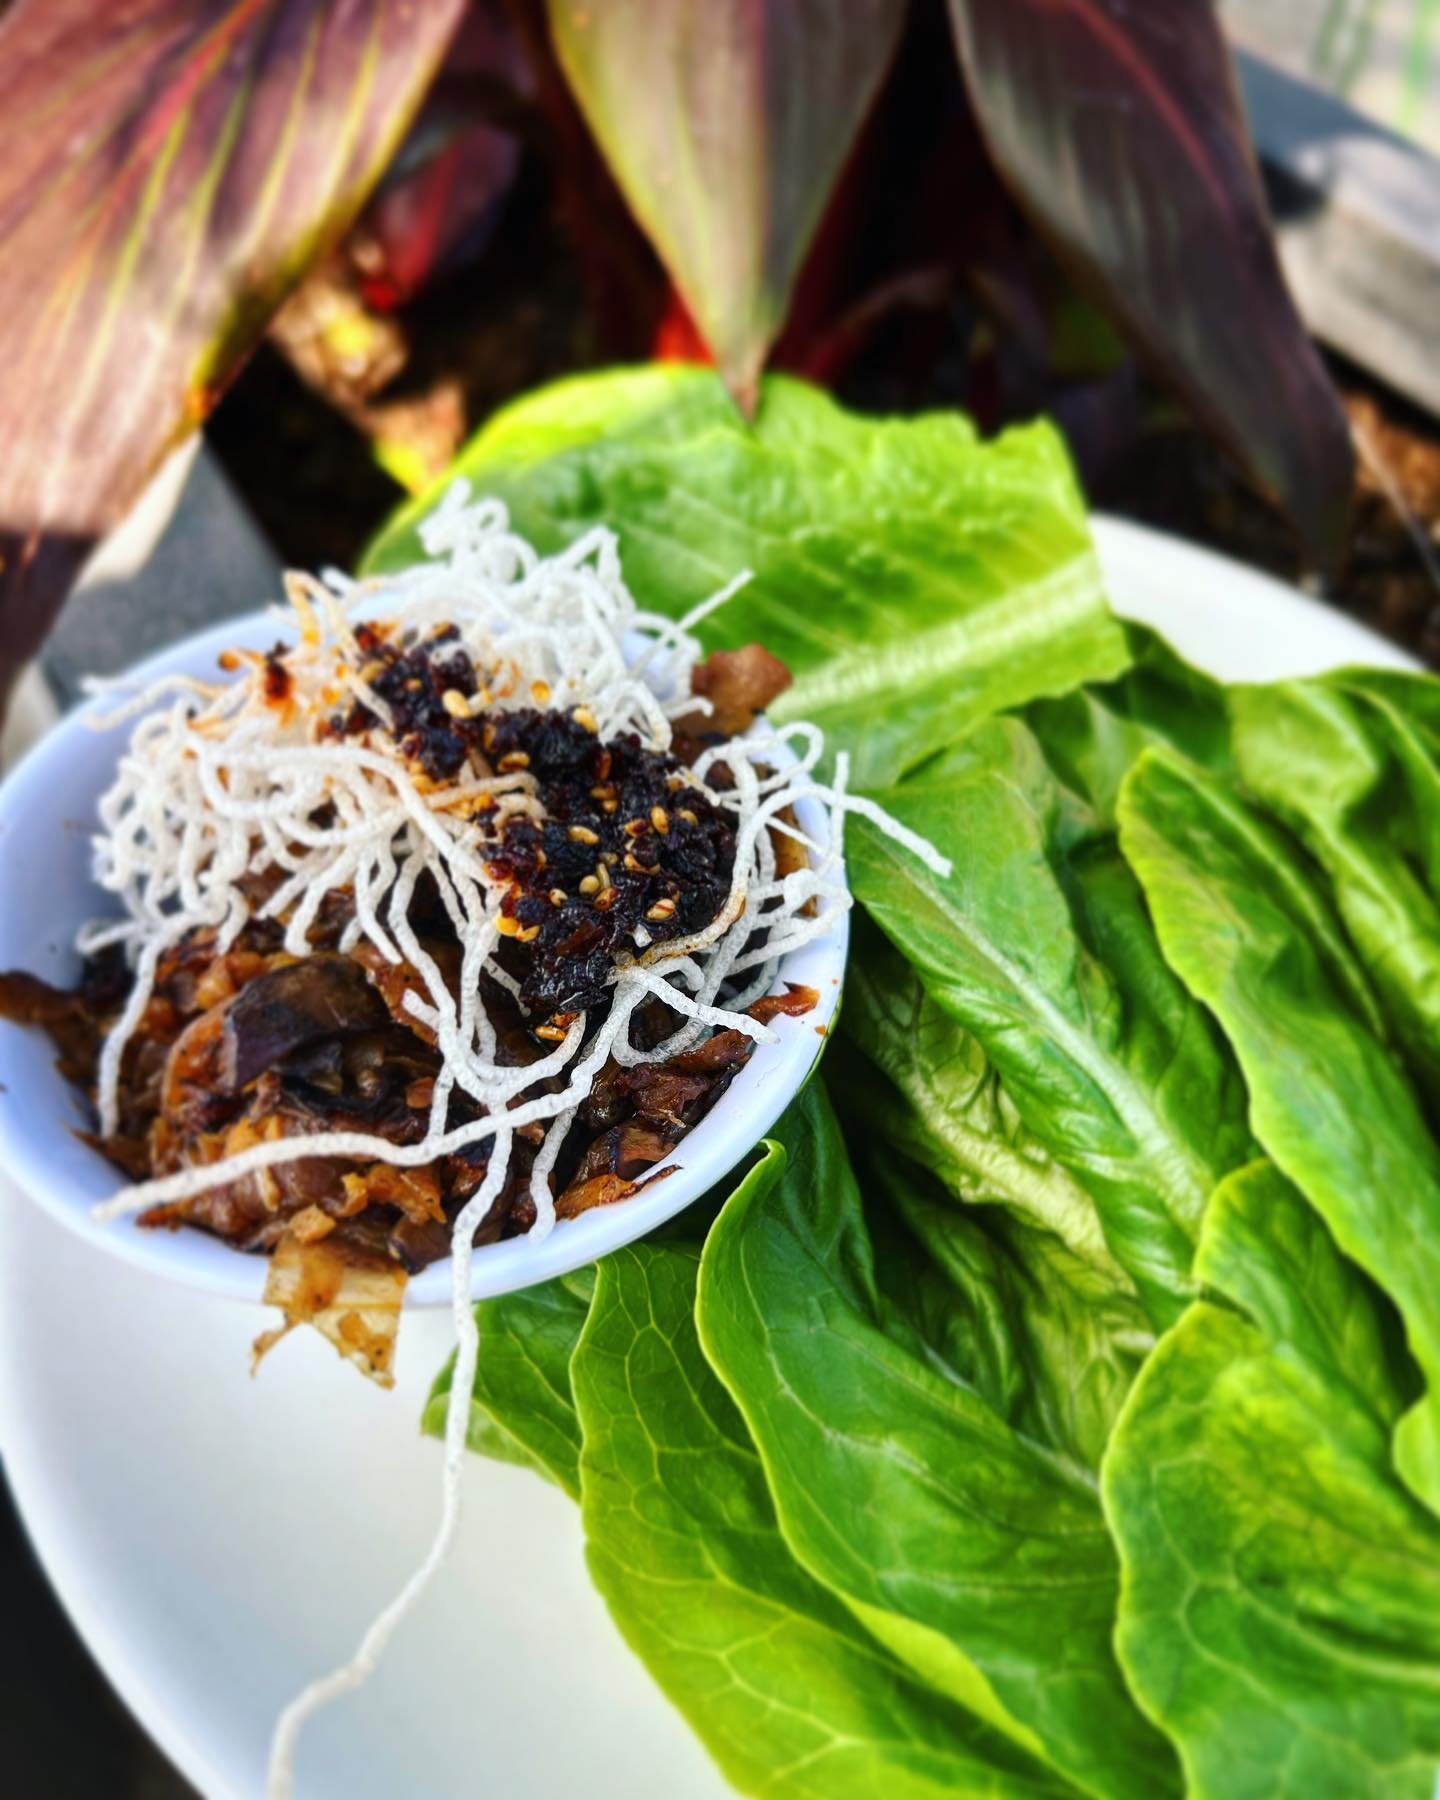 Wrap it, roll it, and savor the scrumptiousness of our MUSHROOM LETTUCE WRAP! Stop in for dinner tonight, enjoy the patio!
.
shiitake &amp; crimini mushrooms, caramelized onion, roasted garlic, hoisin scallion-ginger sauce, chili crunch, butter lettu